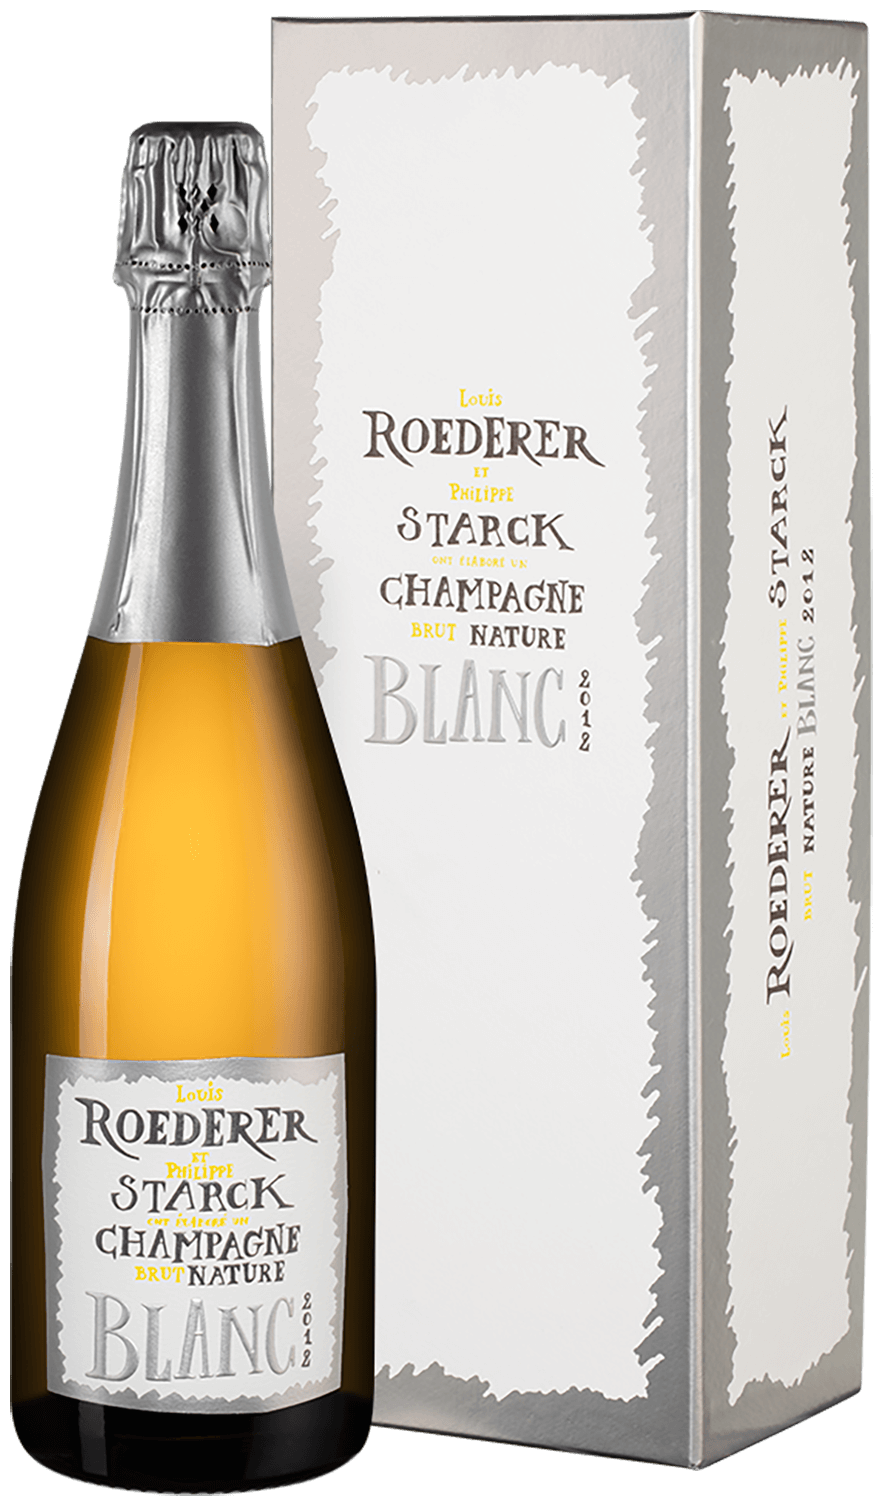 Brut Nature Champagne AOC Louis Roederer (gift box) drappier brut nature zero dosage champagne aop gift box